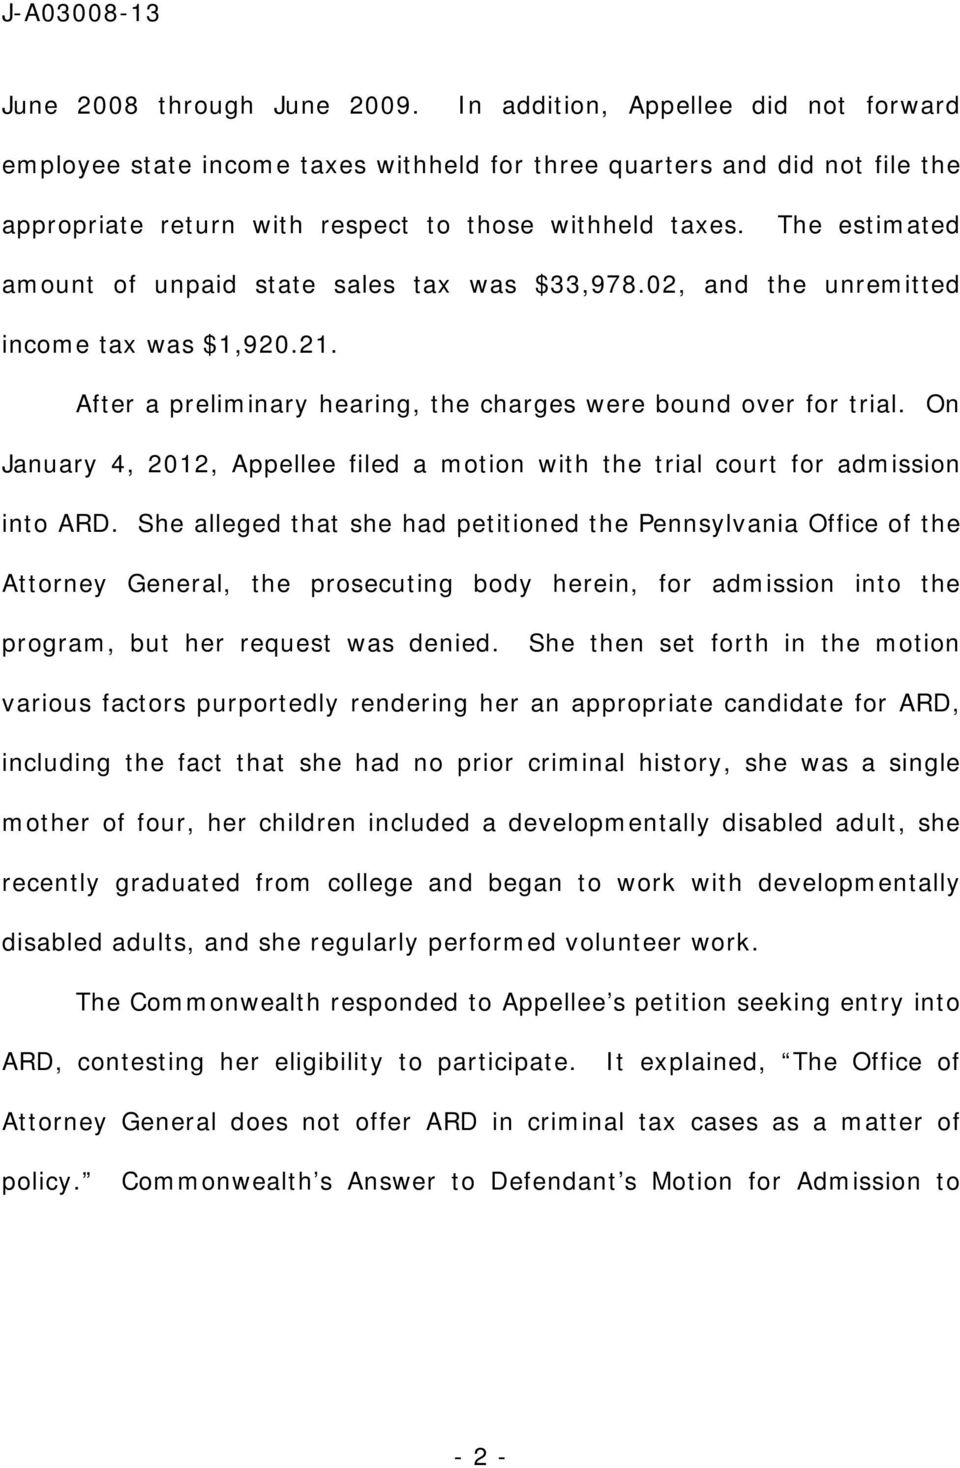 On January 4, 2012, Appellee filed a motion with the trial court for admission into ARD.